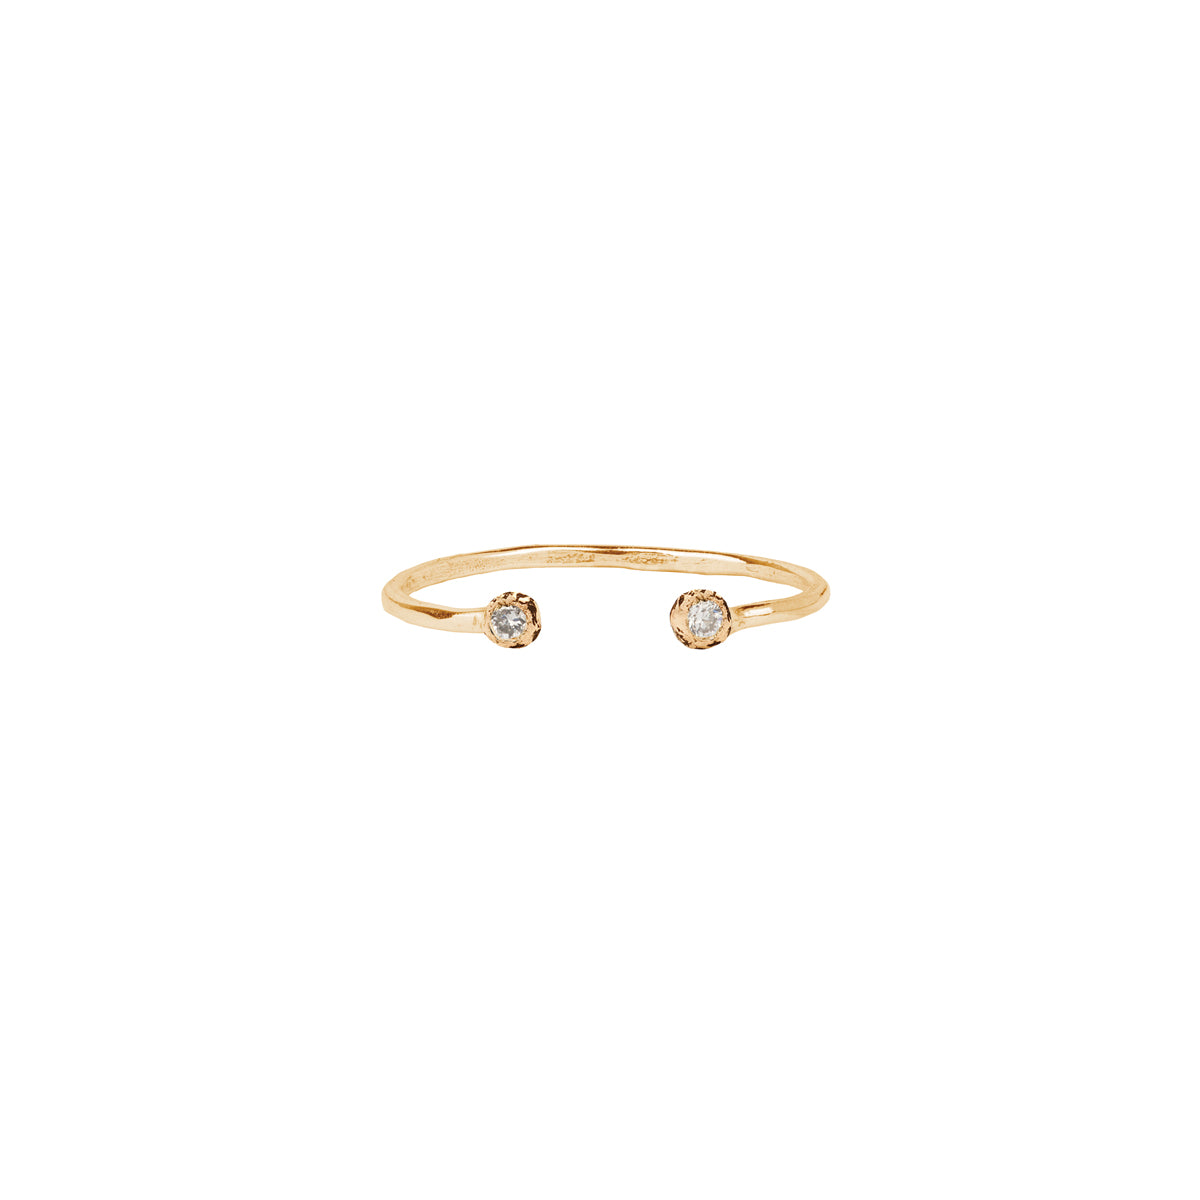 An open 14k gold ring featuring a gold set white diamond.